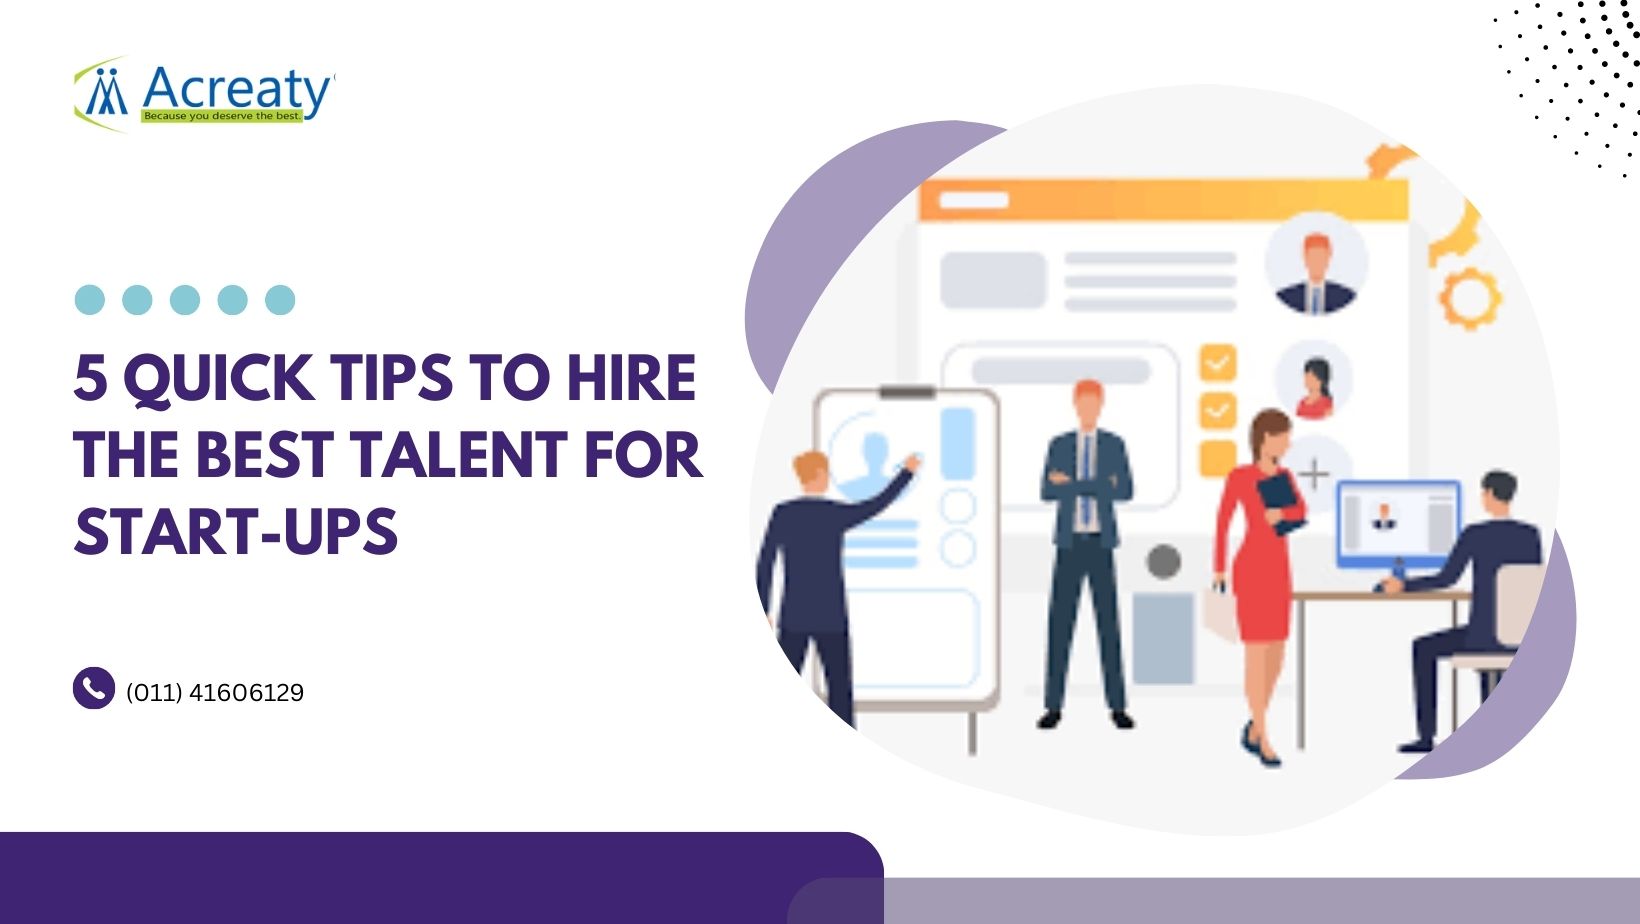 5 Quick Tips to Hire the Best Talent for Start-ups